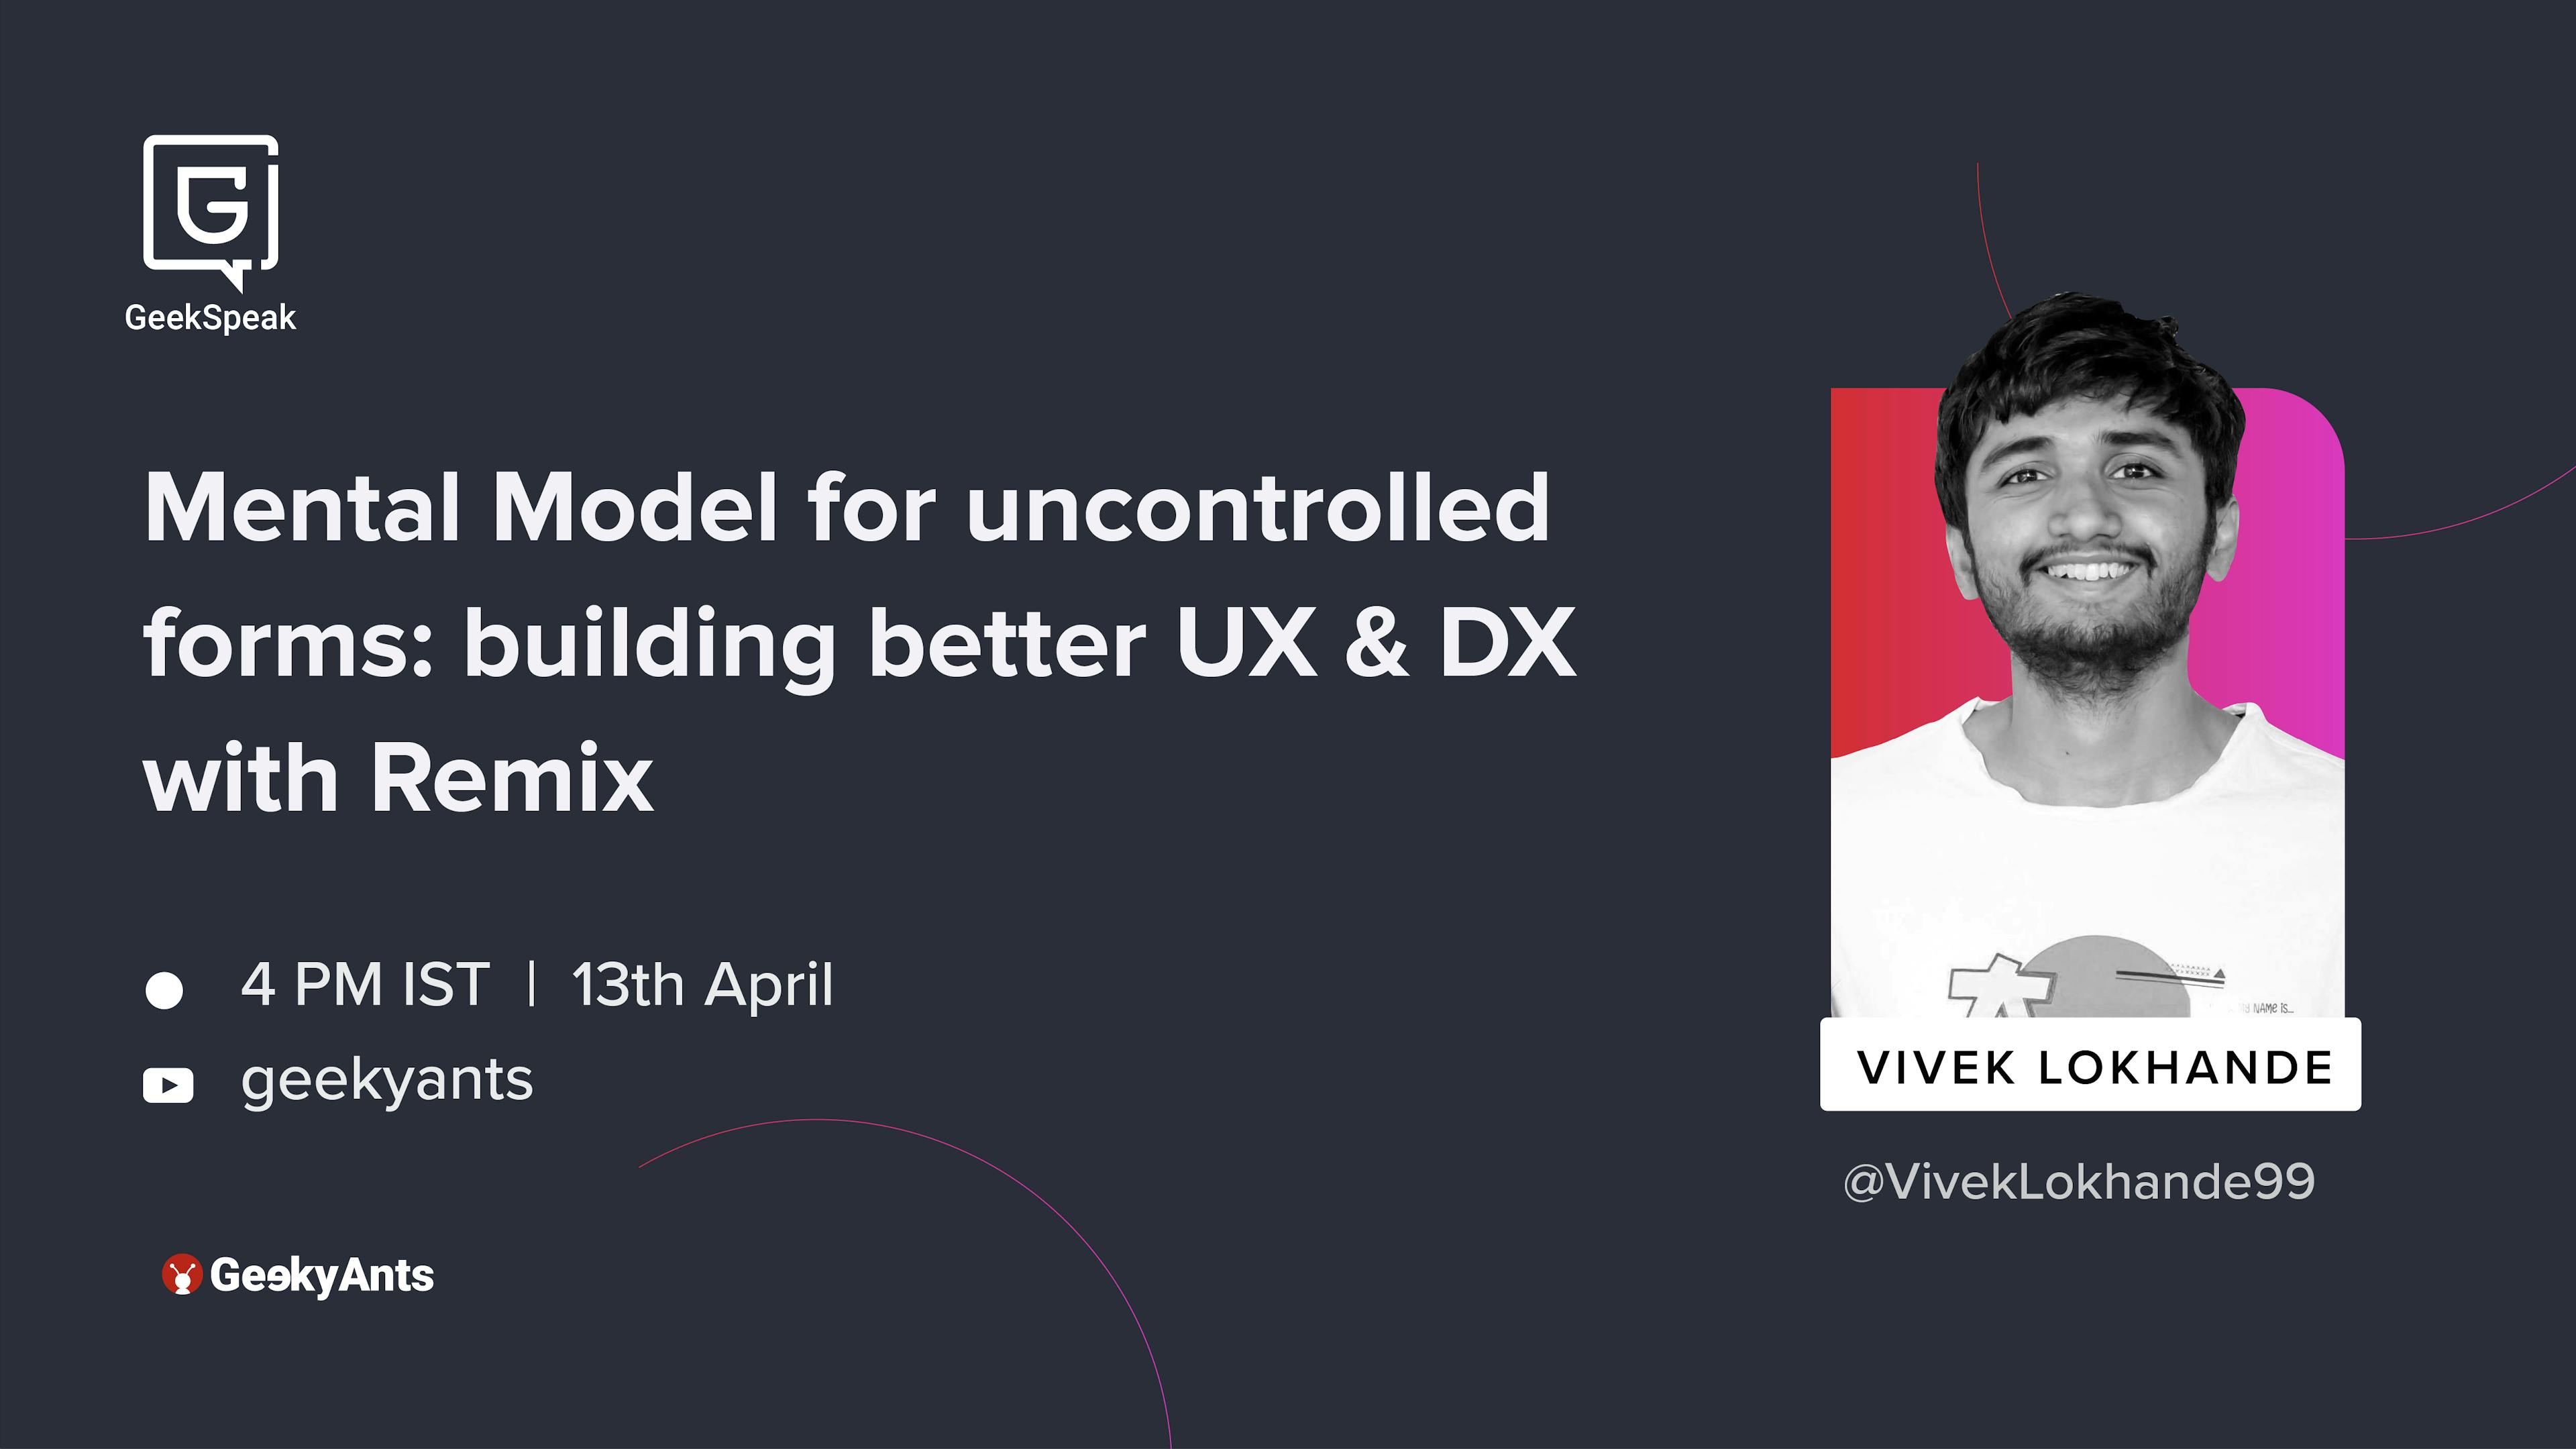 Mental Model for Uncontrolled Forms: Remix for Better UX/DX